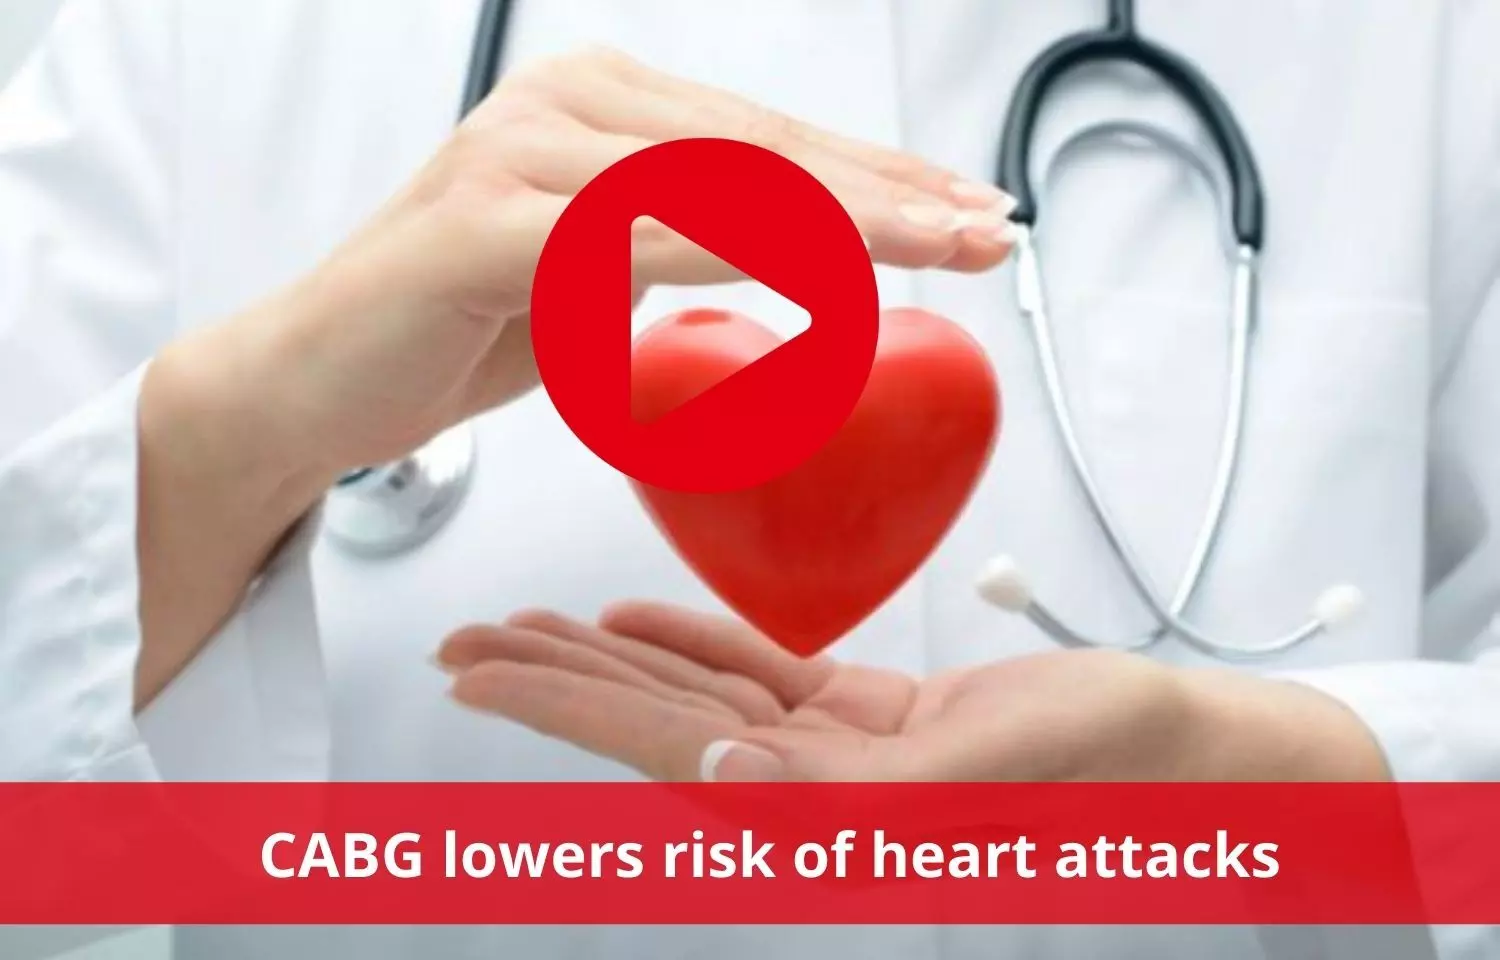 Lower risk of heart attacks, when treated by CABG